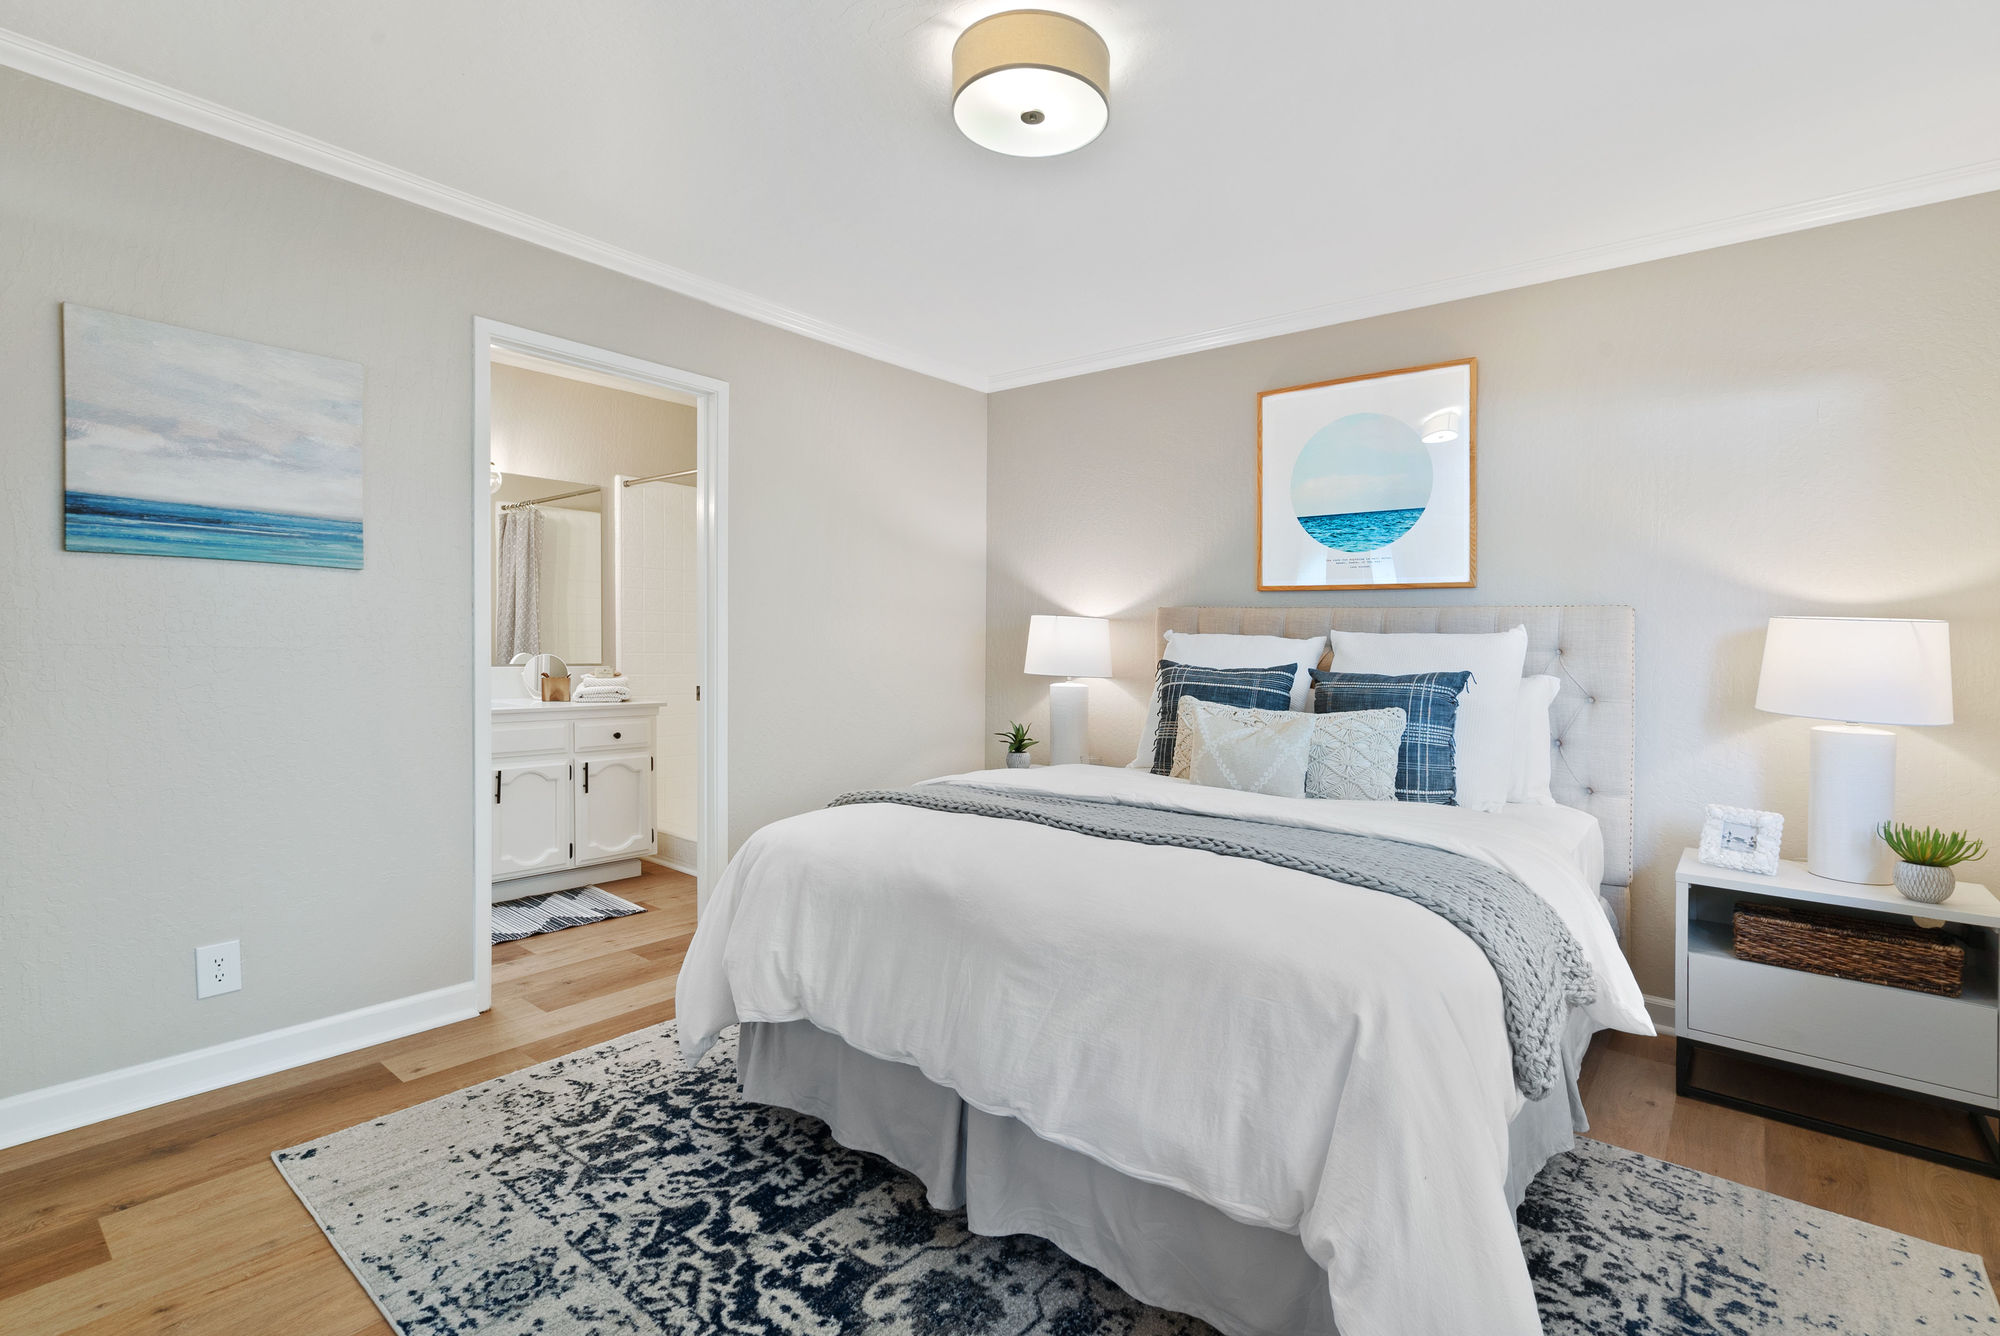 Master bedroom in neutral colors and blue accents